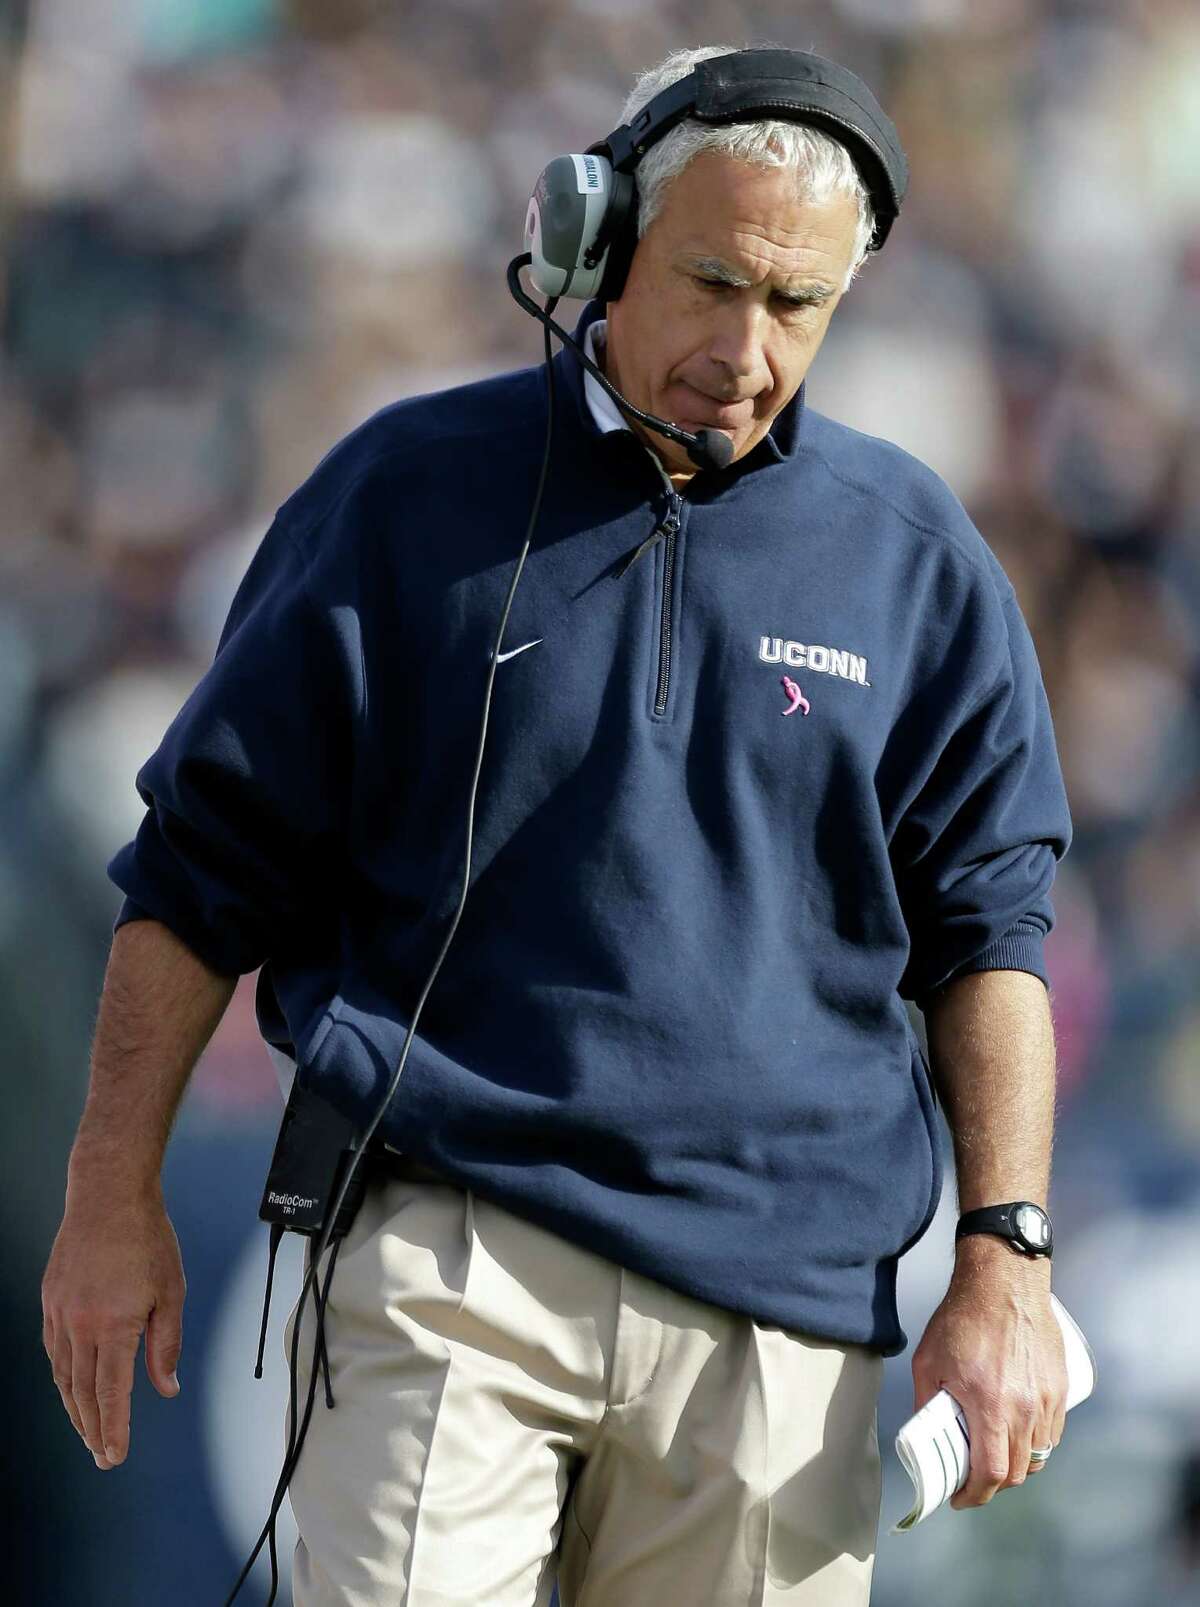 Connecticut head coach Paul Pasqualoni walks on the sidelines in the fourth quarter of an NCAA college football game against Temple in East Hartford, Conn., Saturday, Oct. 13, 2012. Temple won 17-14 in overtime. (AP Photo/Michael Dwyer)